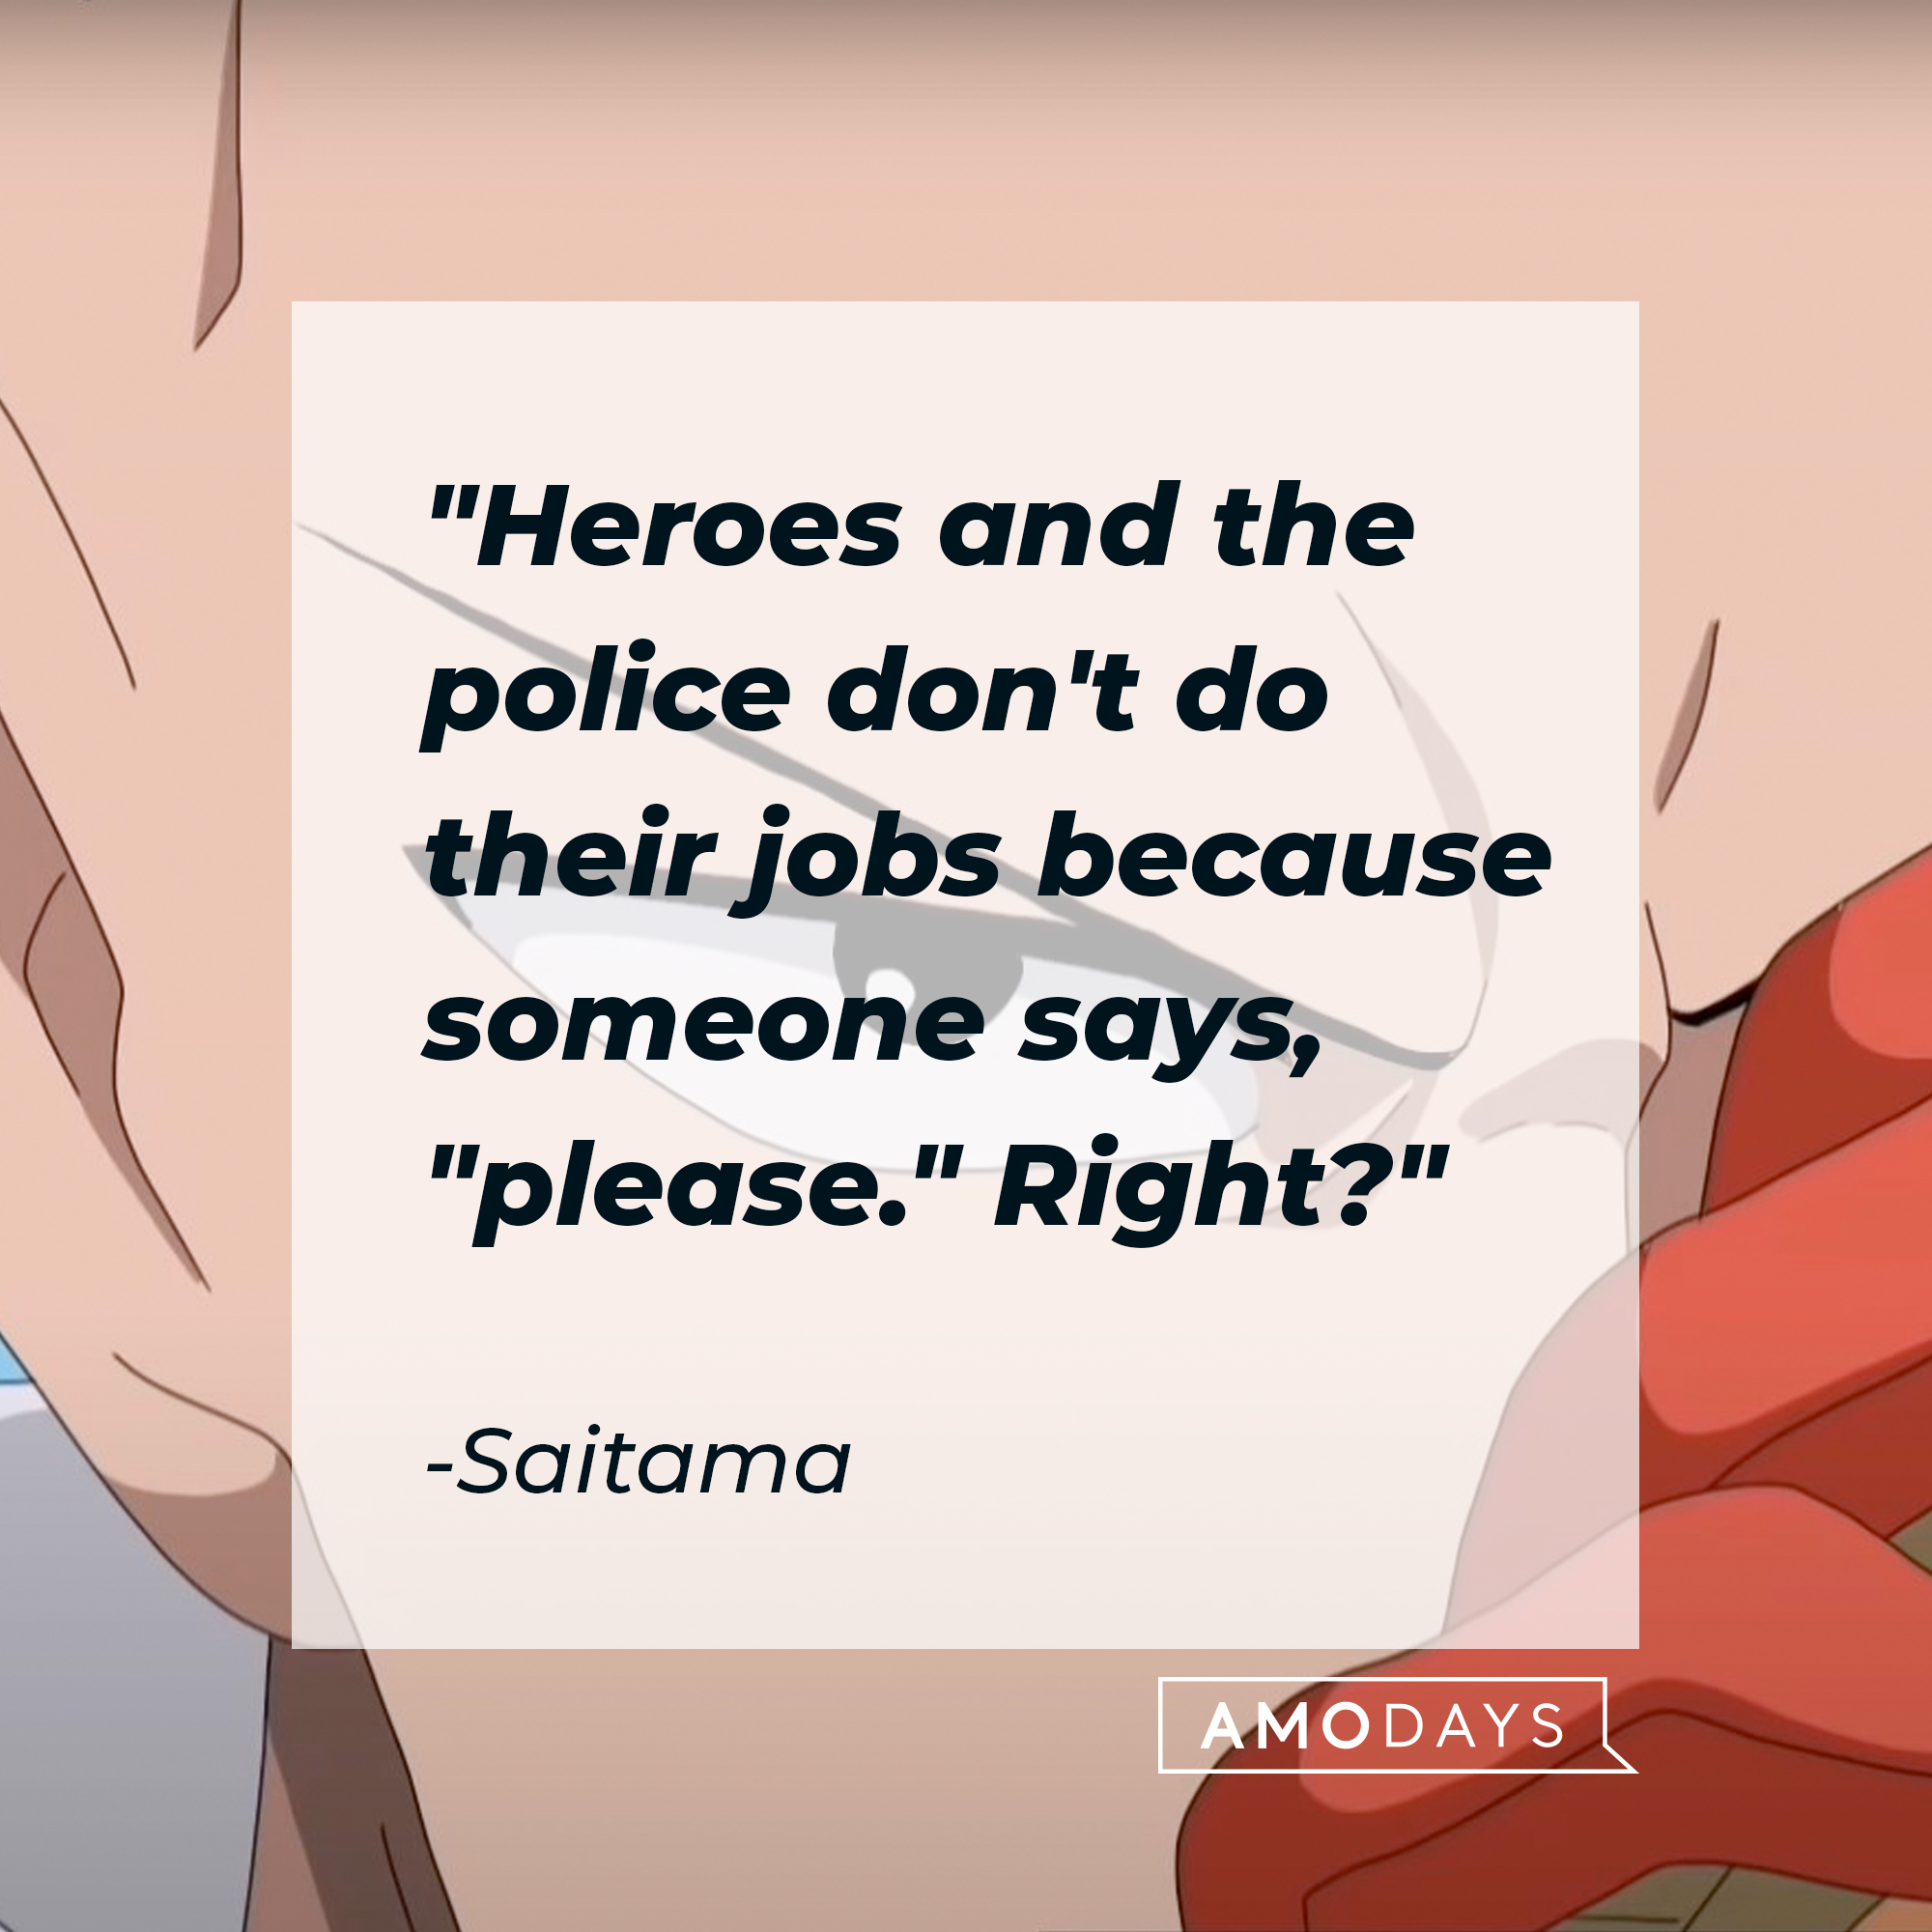 Saitama's quote: "Heroes and the police don't do their jobs because someone says, "please." Right?" | Source: Facebook.com/OnePunchManMobileSEAEN